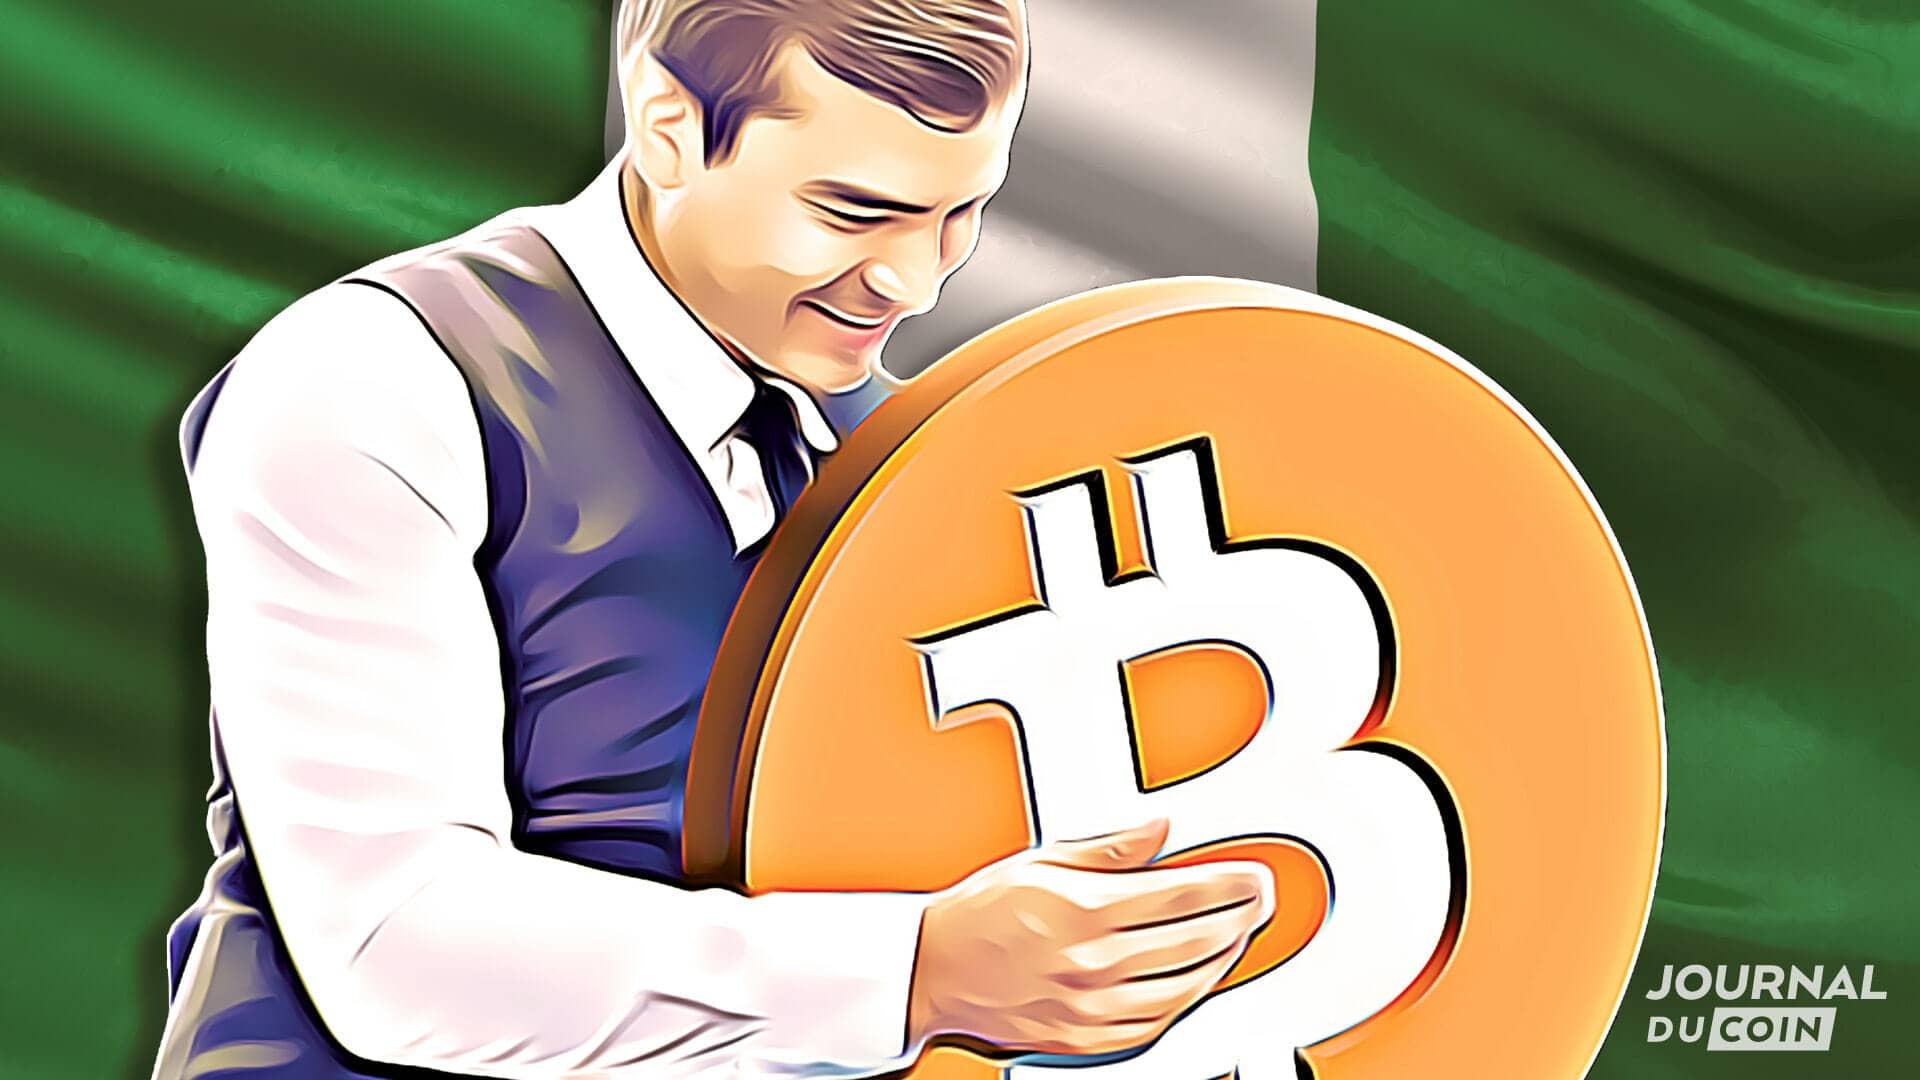 Nigeria, figurehead of an Africa that is ready to adopt Bitcoin?